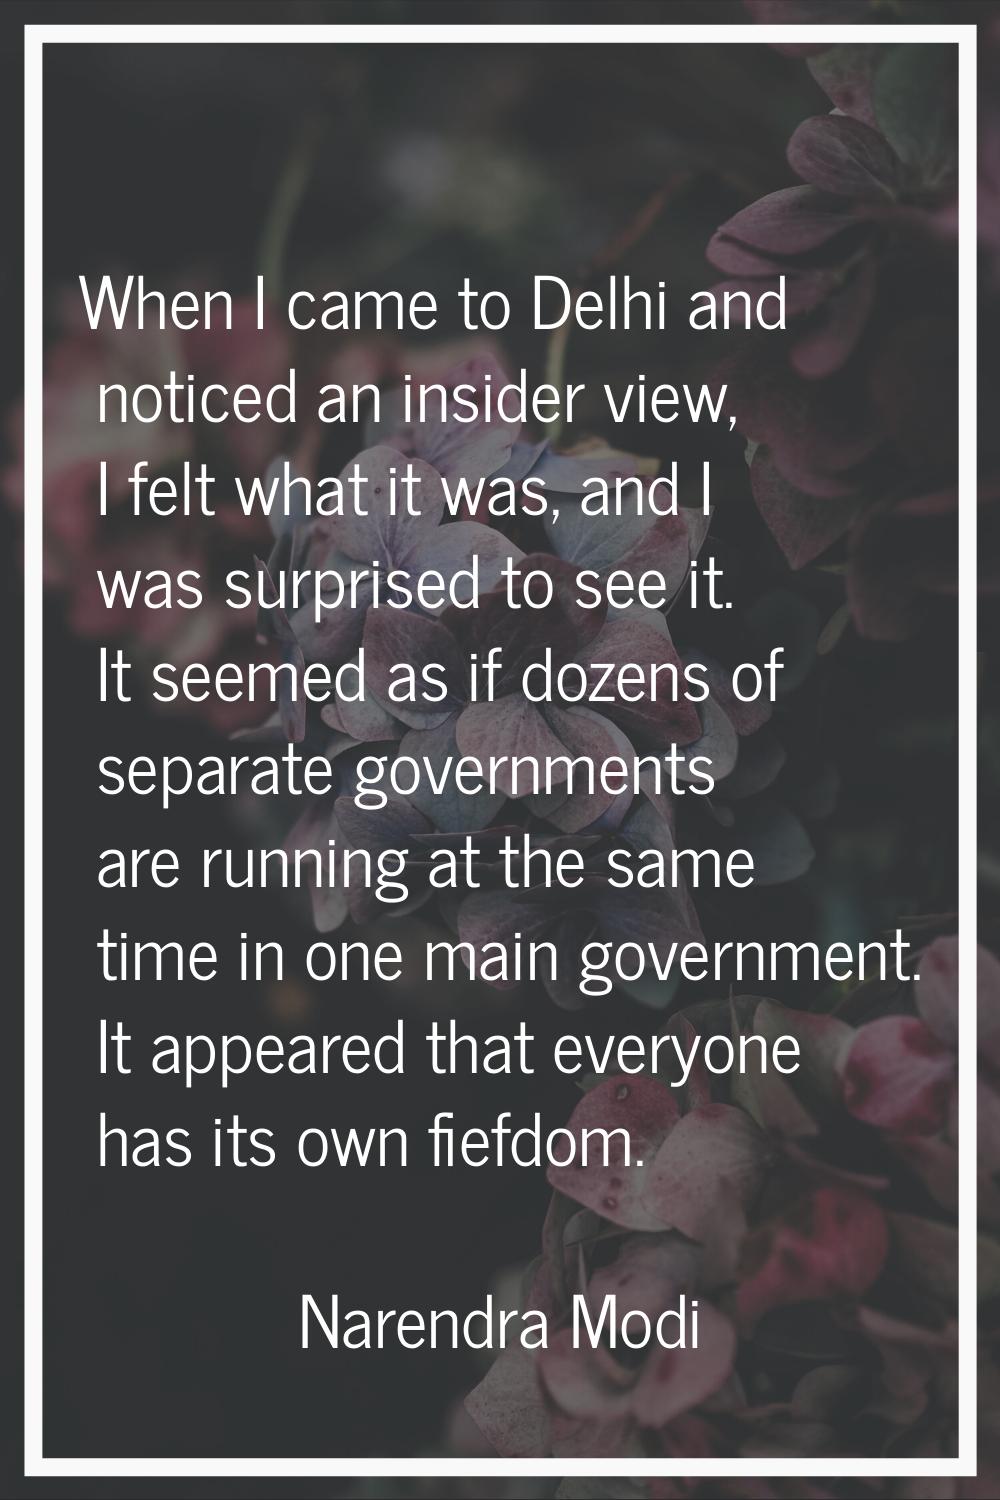 When I came to Delhi and noticed an insider view, I felt what it was, and I was surprised to see it